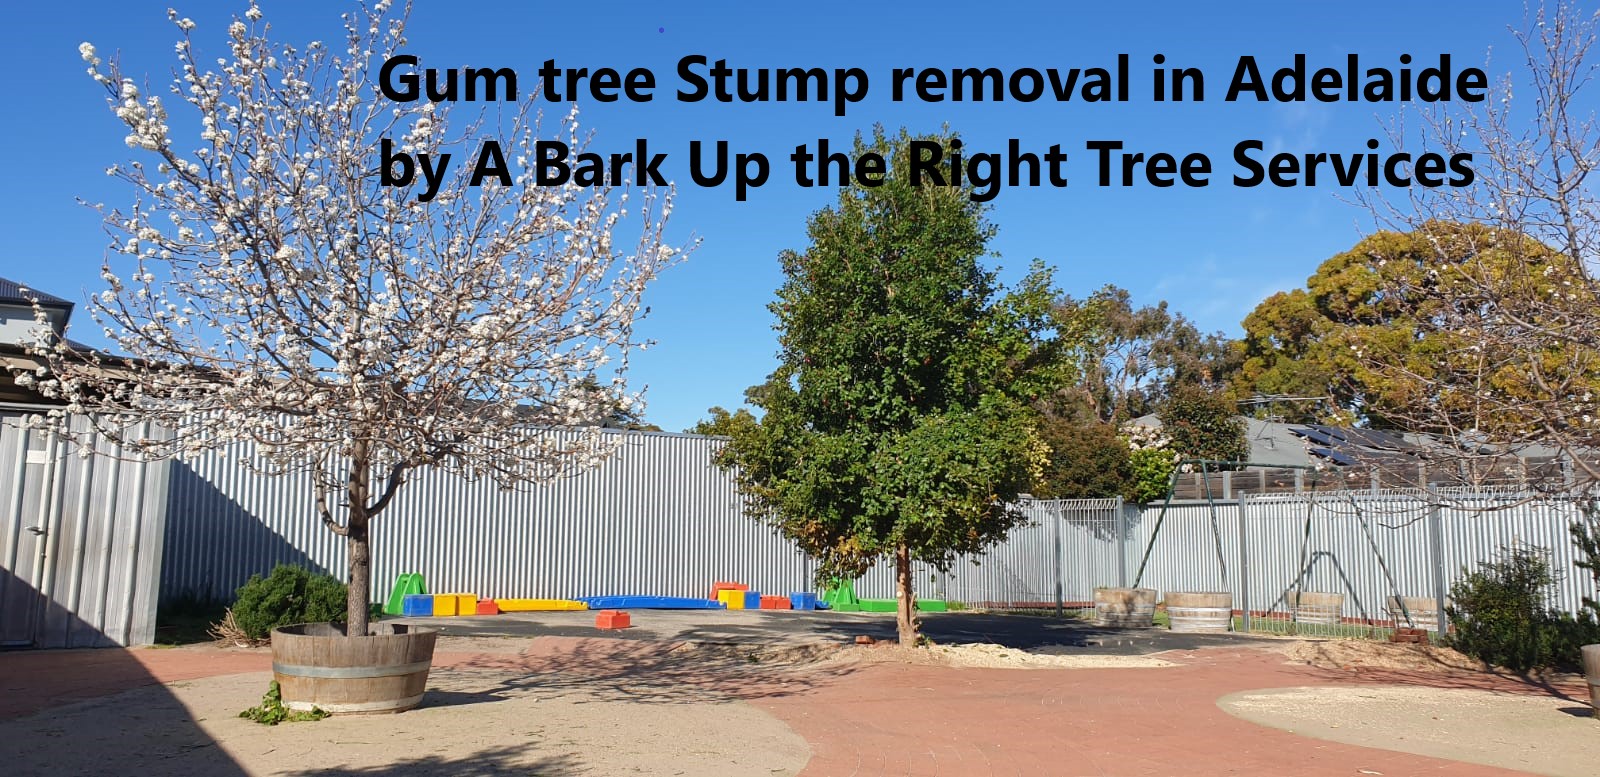 A Bark Up The Right Tree - Adelaide Tree Removals is sharing a COVID-19 update in Marion, South Australia, Australia.